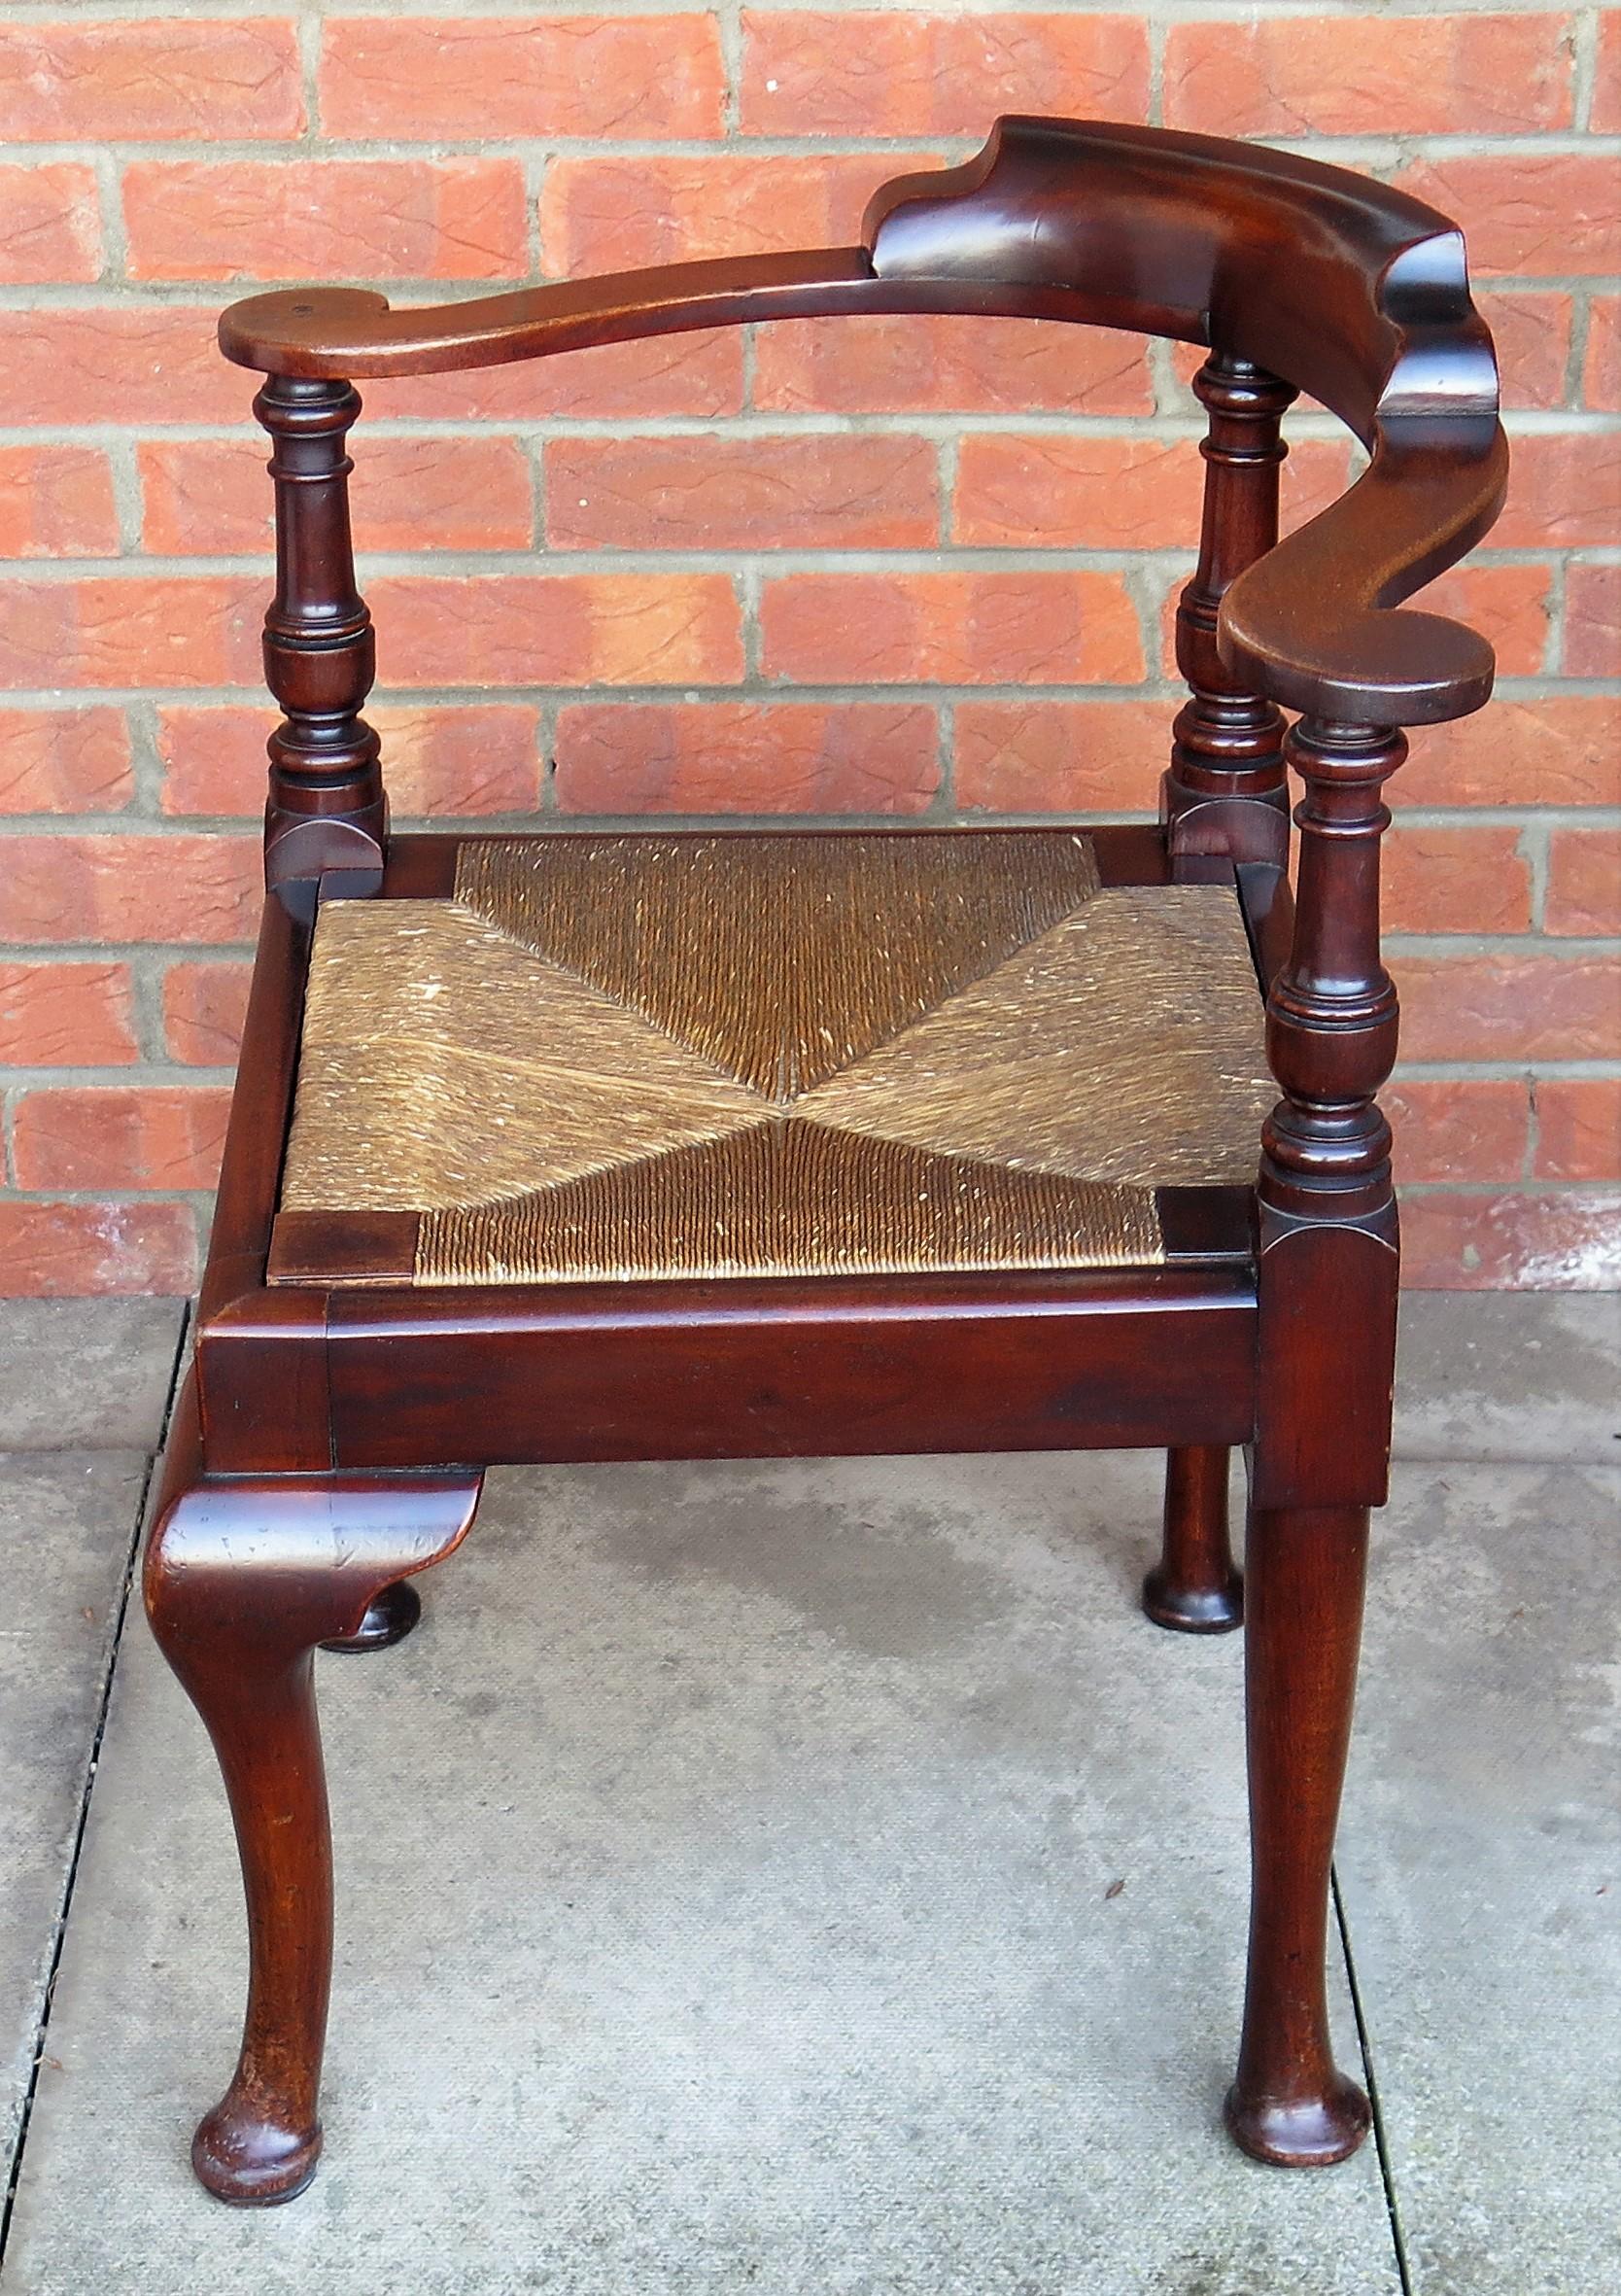 Hand-Crafted Georgian Corner Chair or Armchair in walnut with Rush Seat, English circa 1780